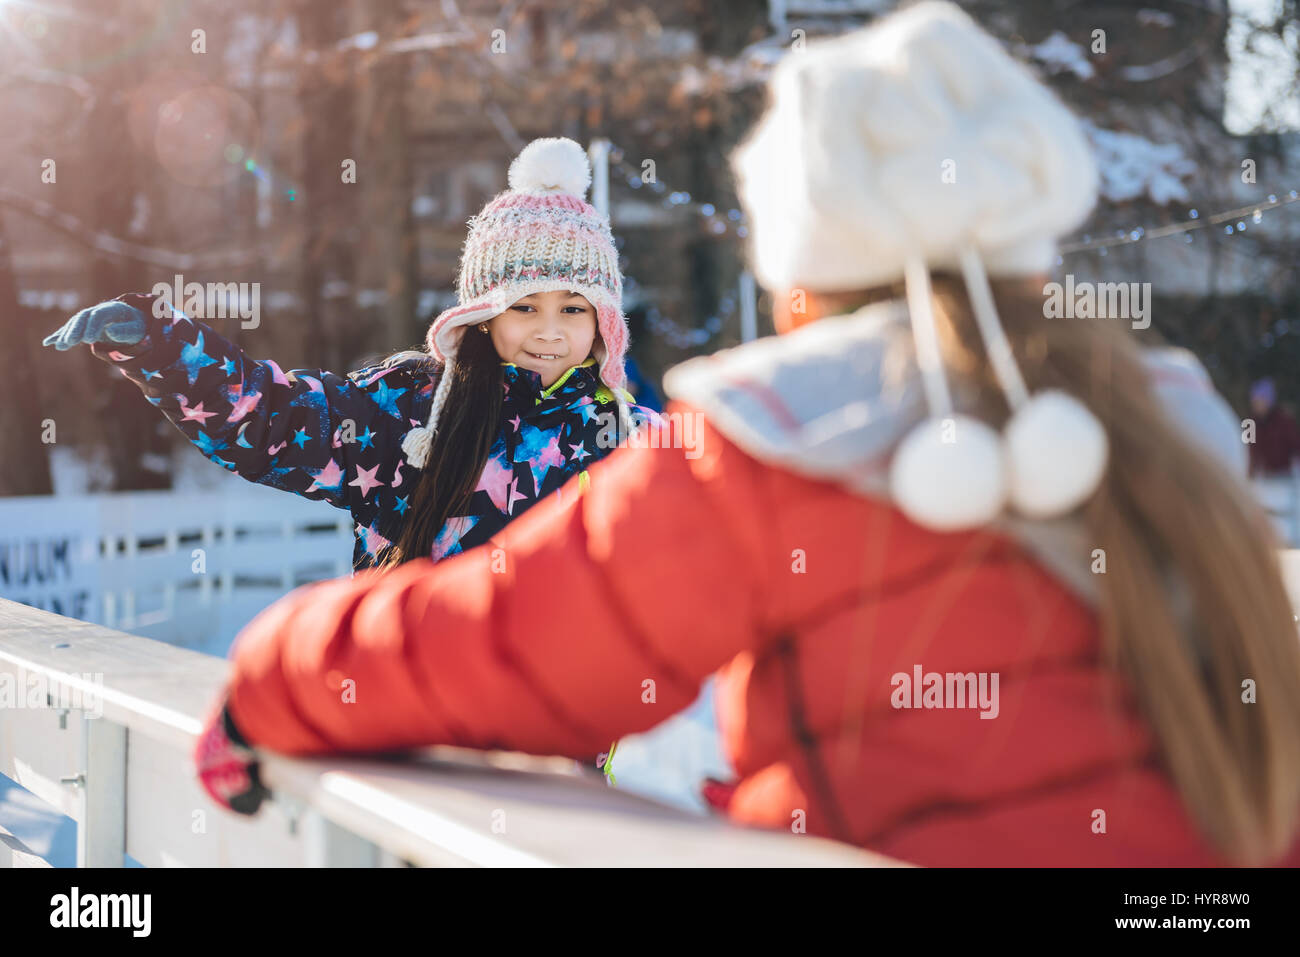 Two girls learning to skate on the temporary ice rink Stock Photo